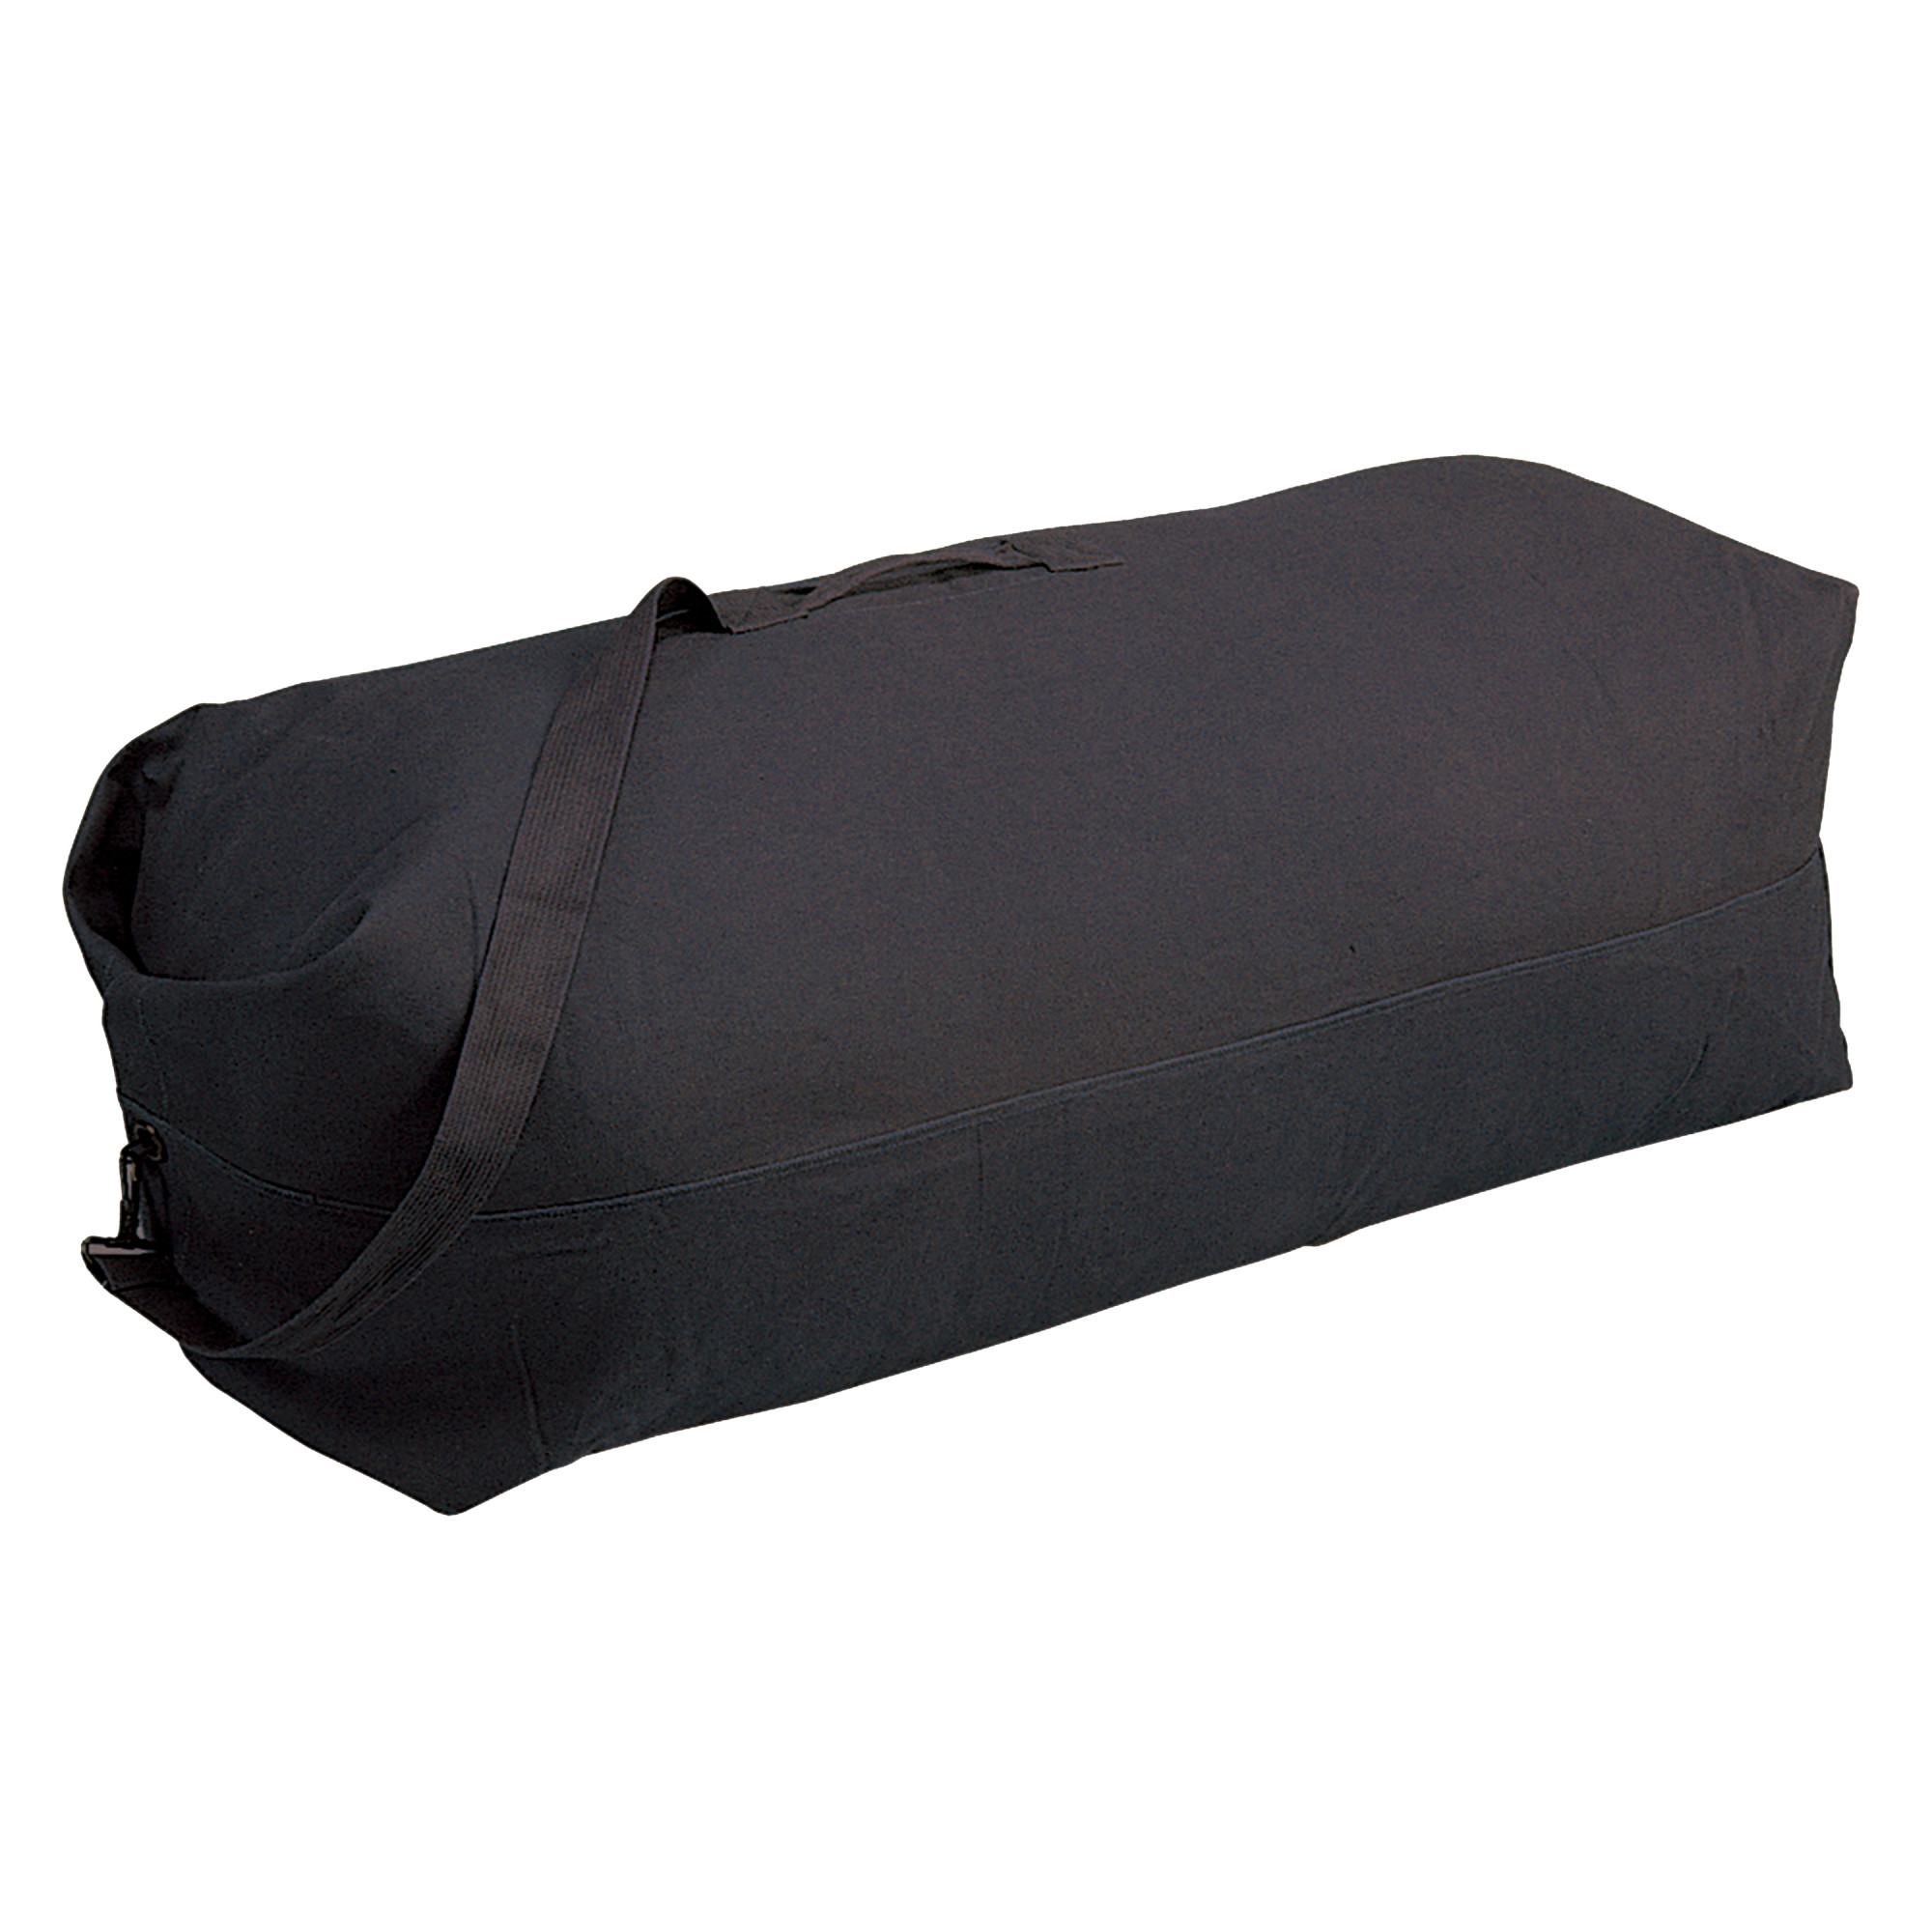 Stansport Top Load Canvas Deluxe Duffel Bag - Black Cotton - image 1 of 3